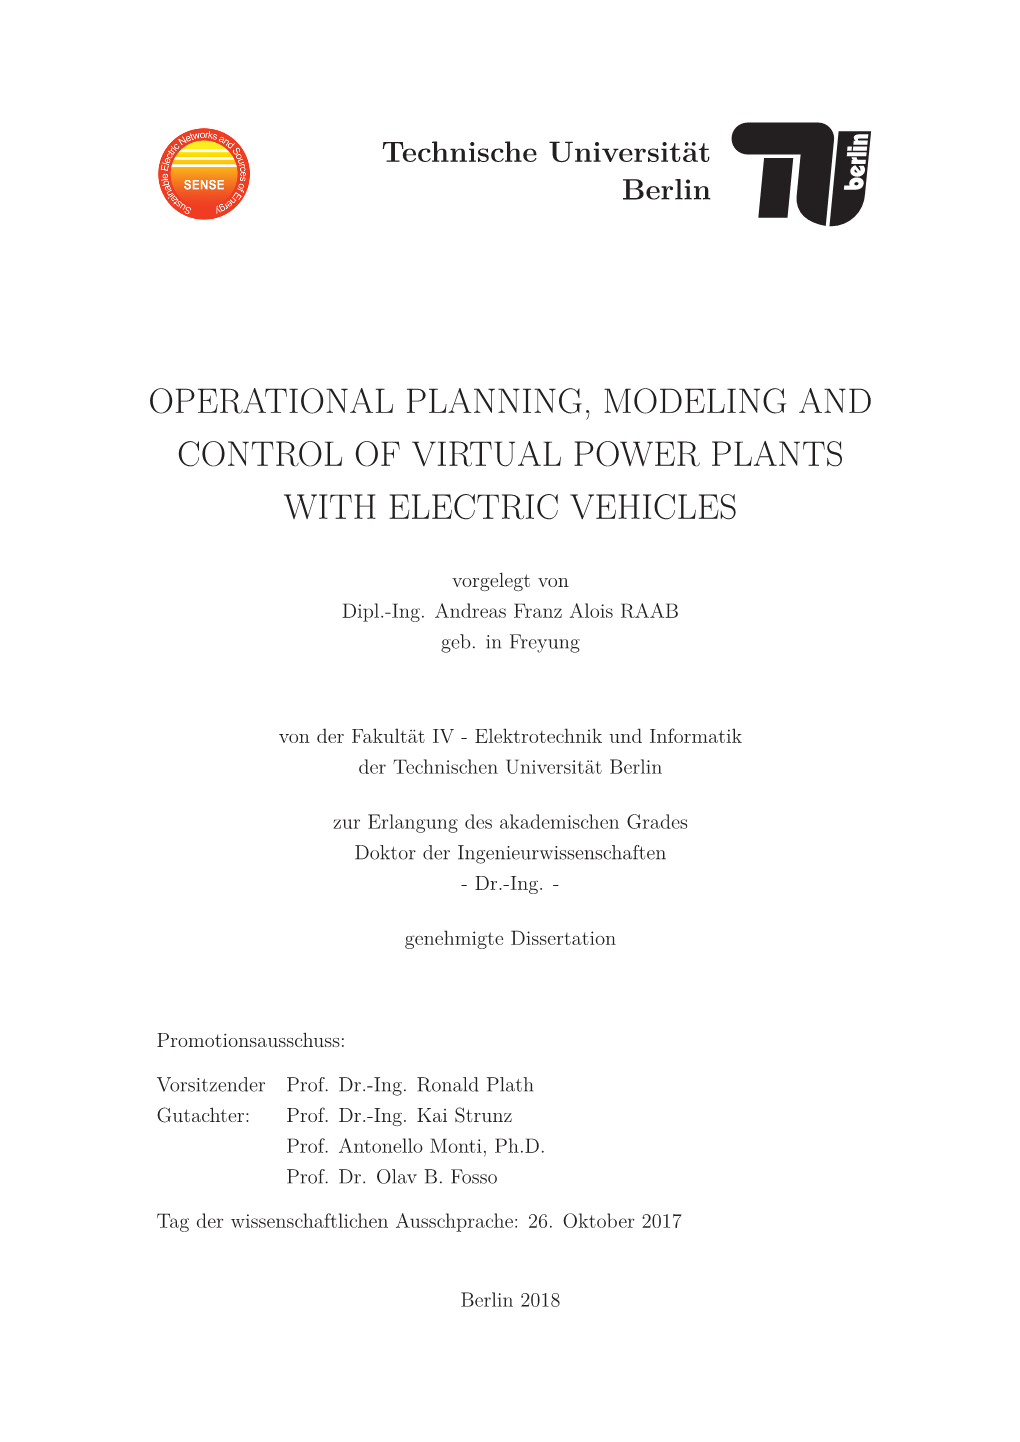 Operational Planning, Modeling and Control of Virtual Power Plants with Electric Vehicles